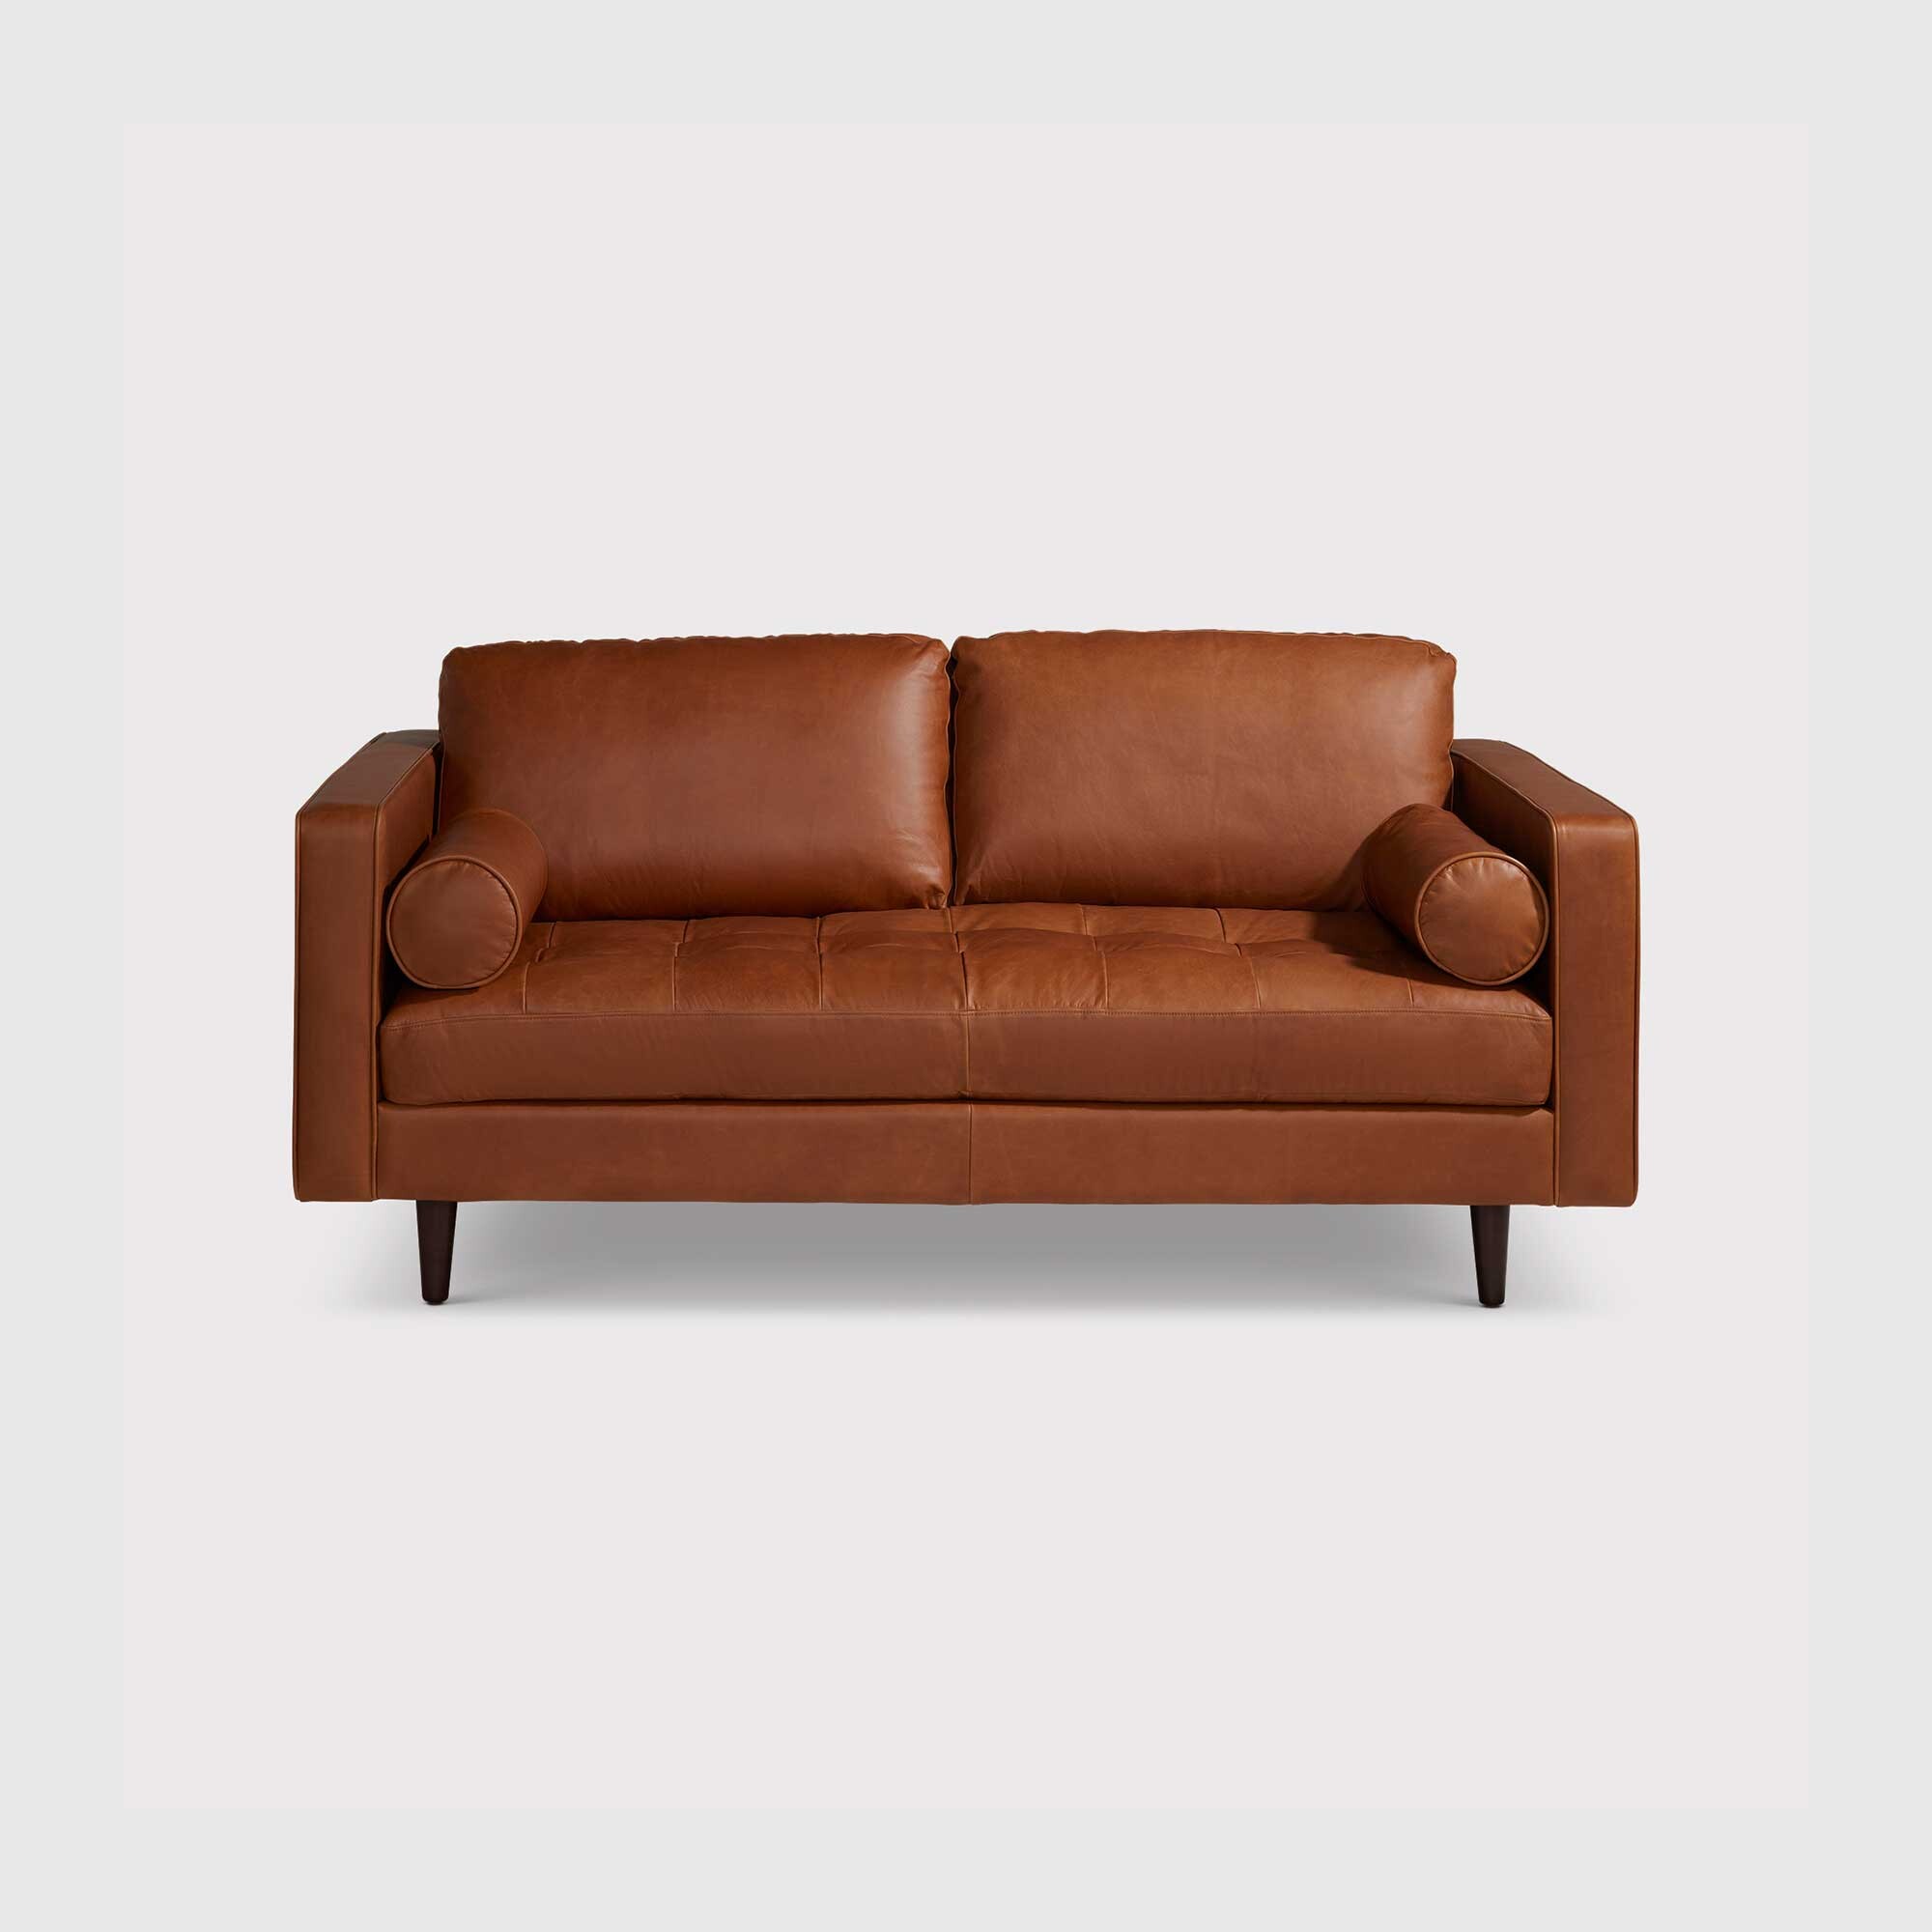 Hemingway Large 2 Seater Sofa, Brown Leather | Barker & Stonehouse